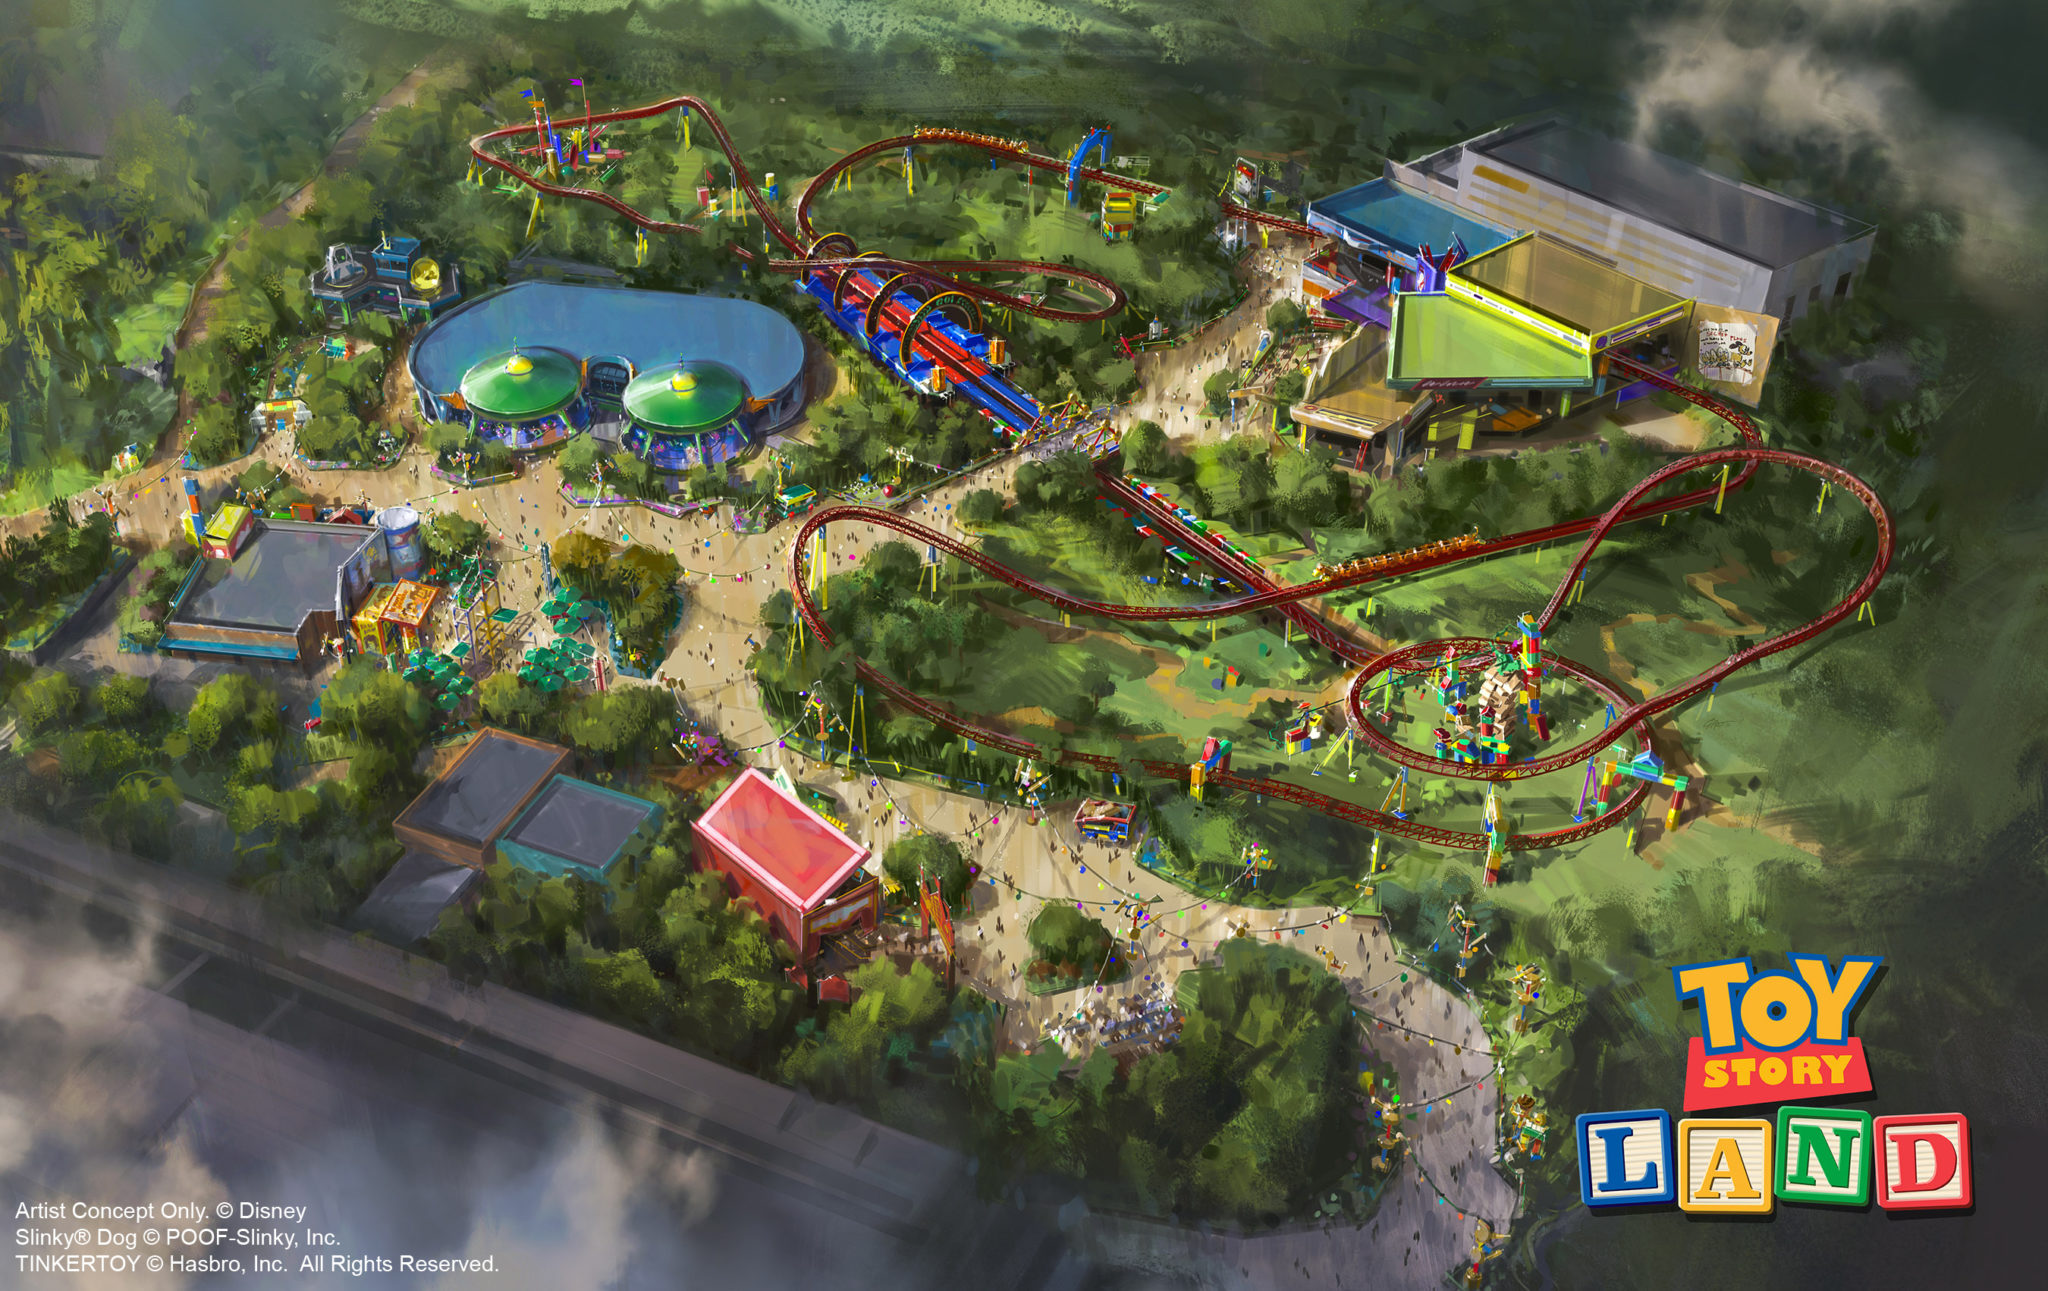 Everything We Know So Far About Alien Swirling Saucers In Toy Story Land